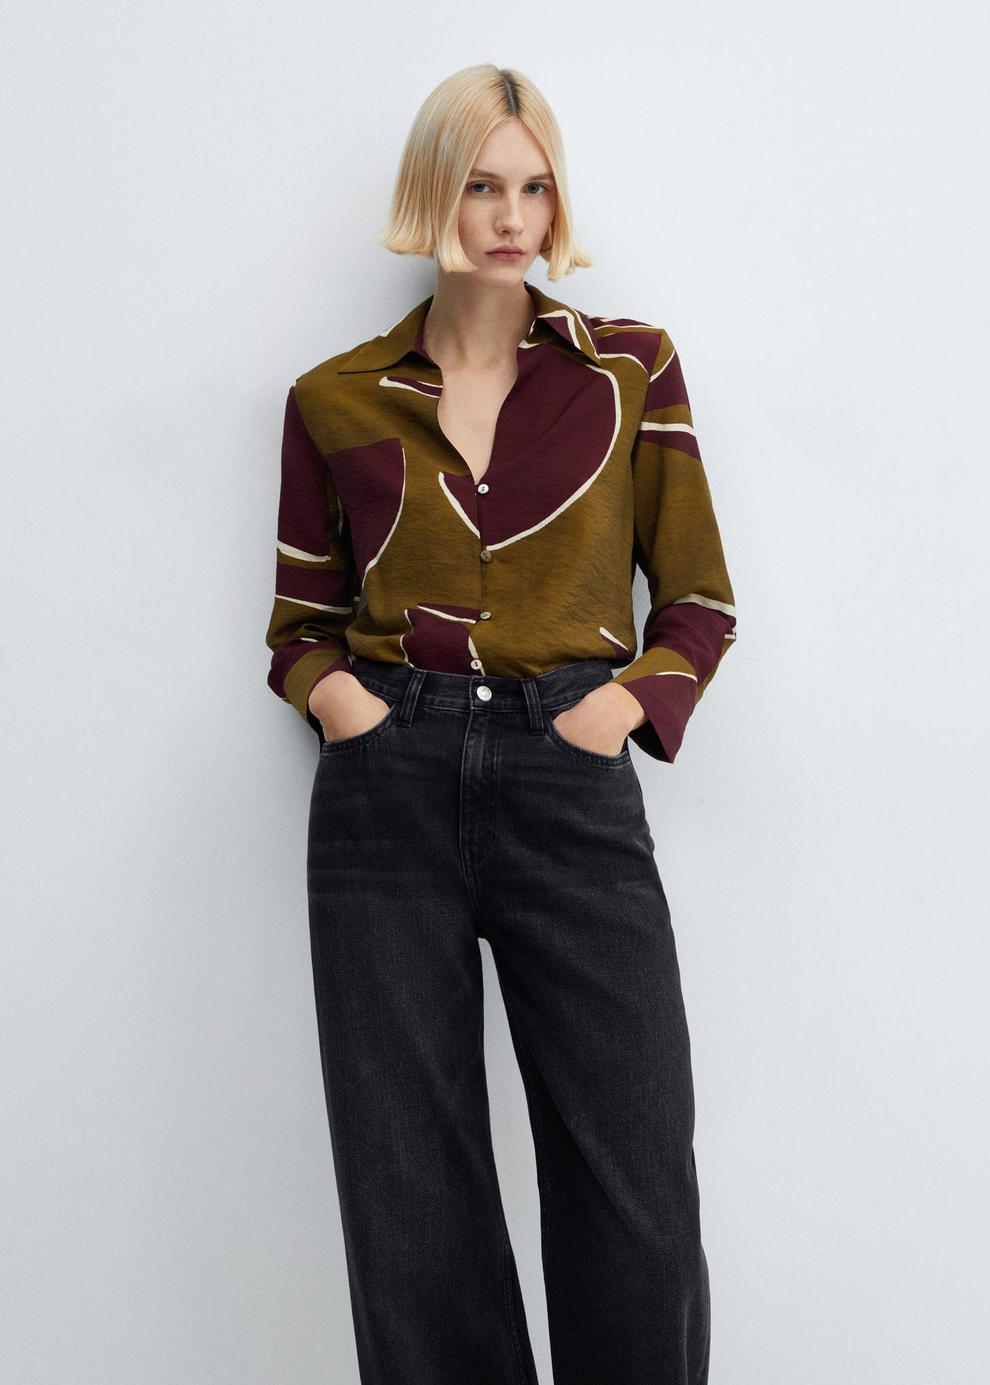 Satin print shirt offers at $44.99 in Mango